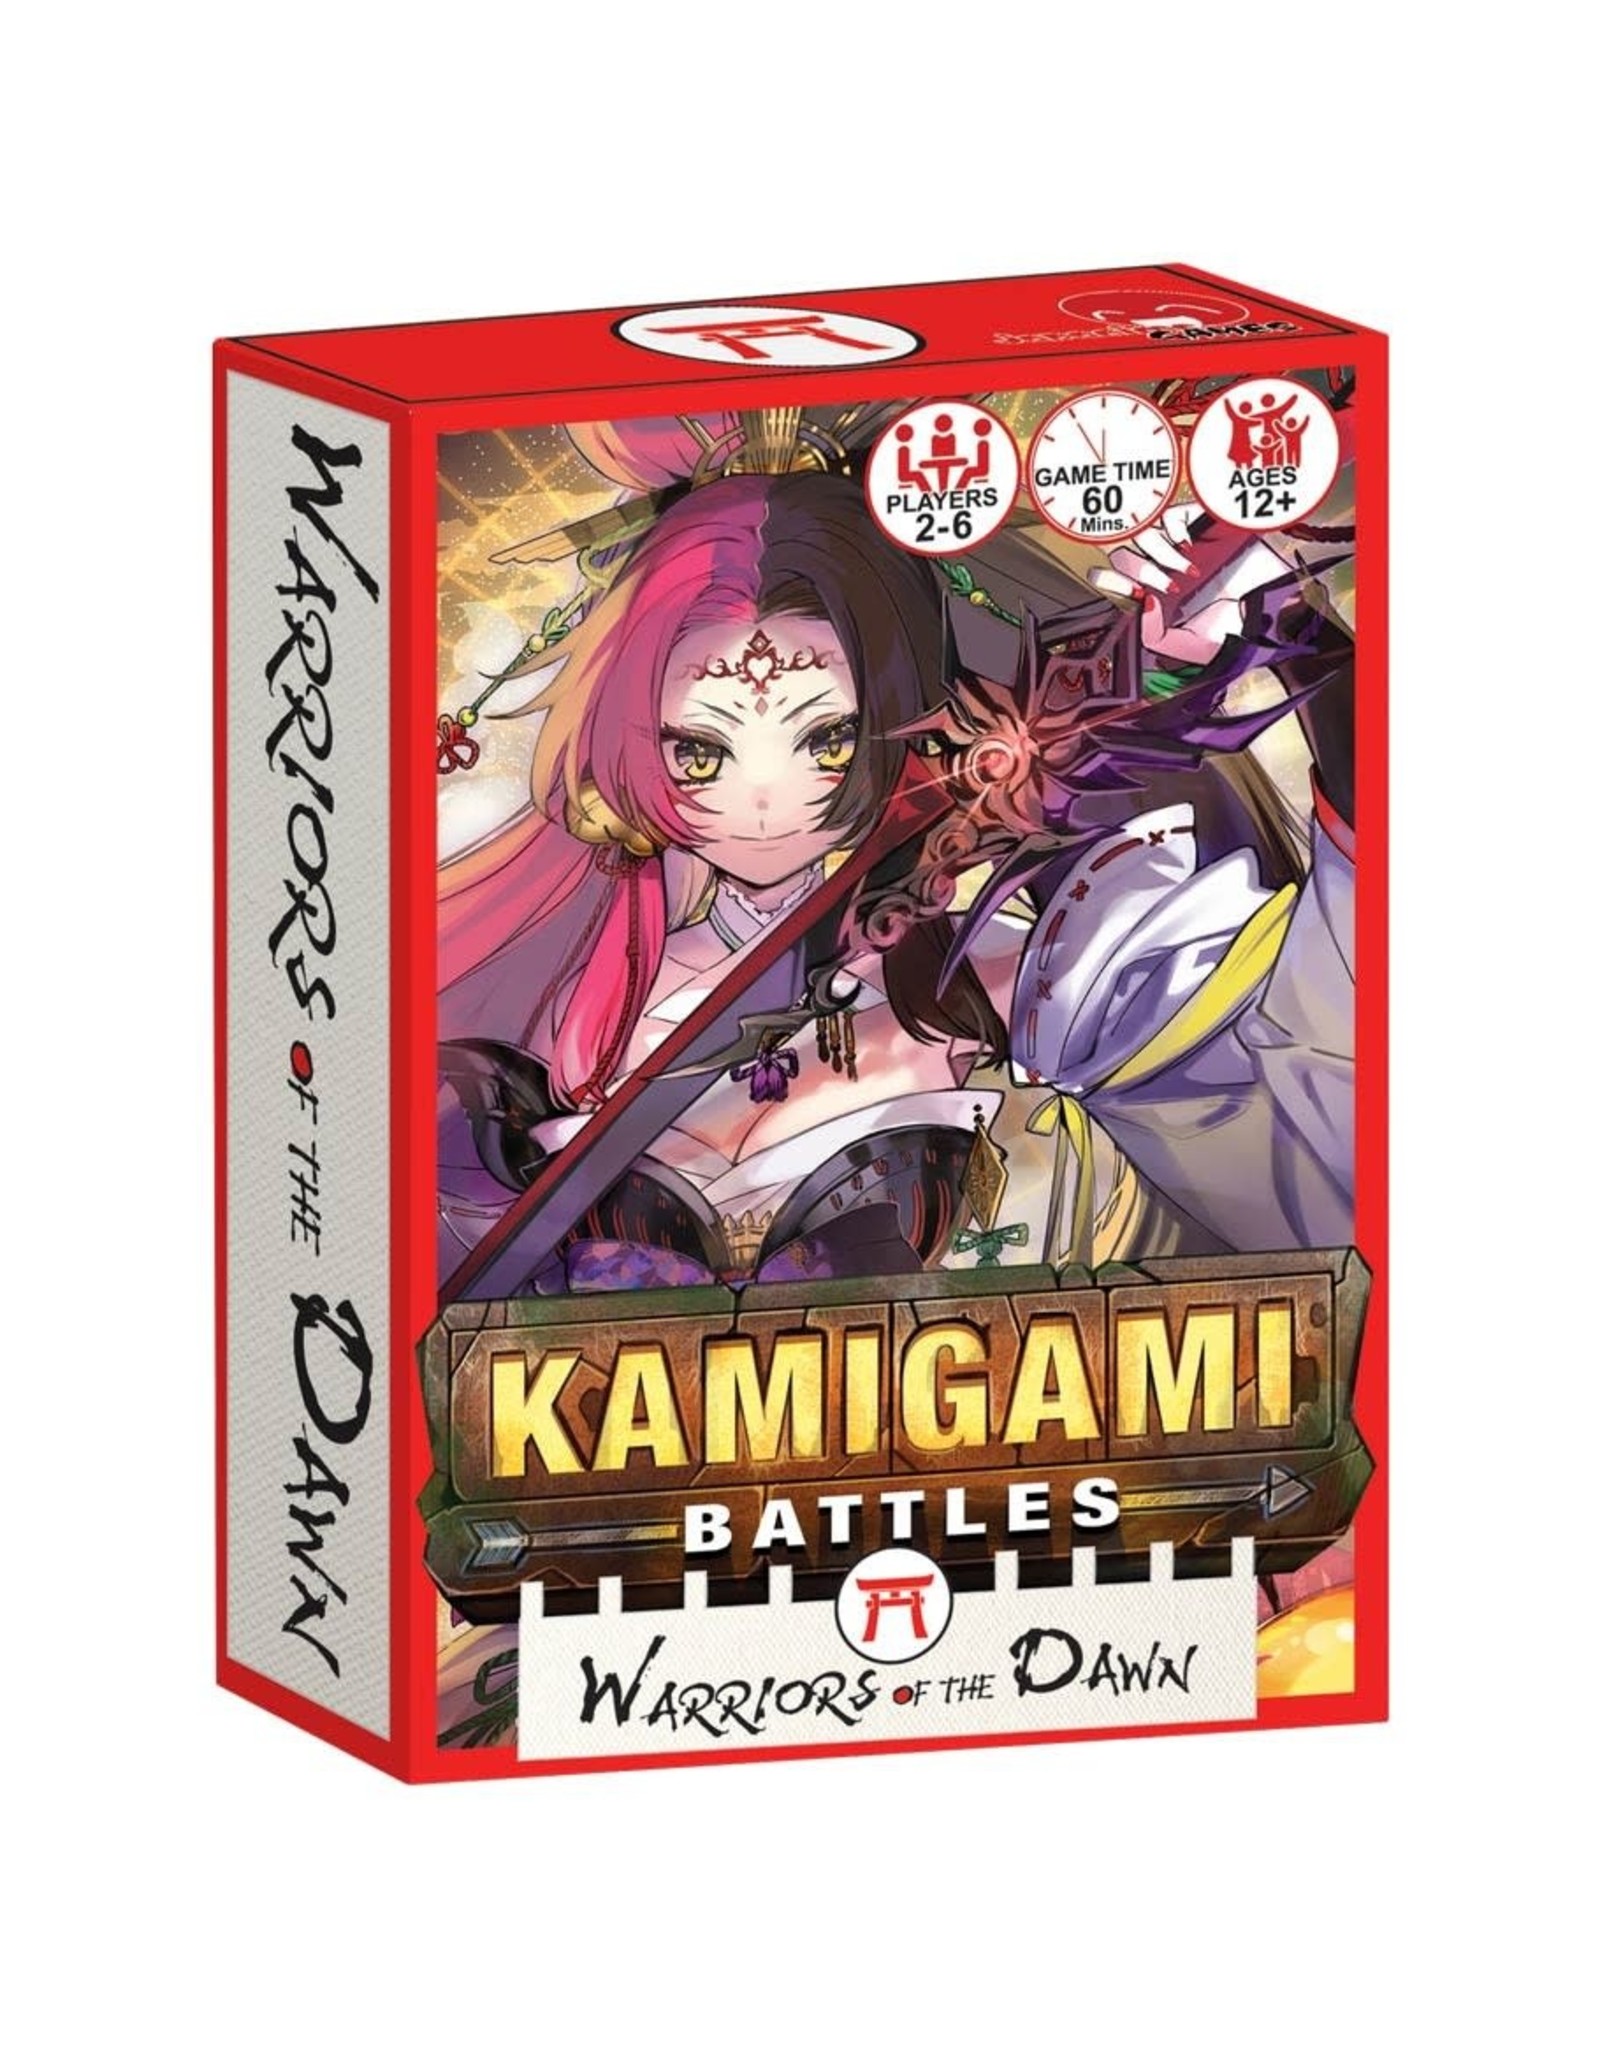 Japanime Games Kamigami Battles: Warriors of the Dawn